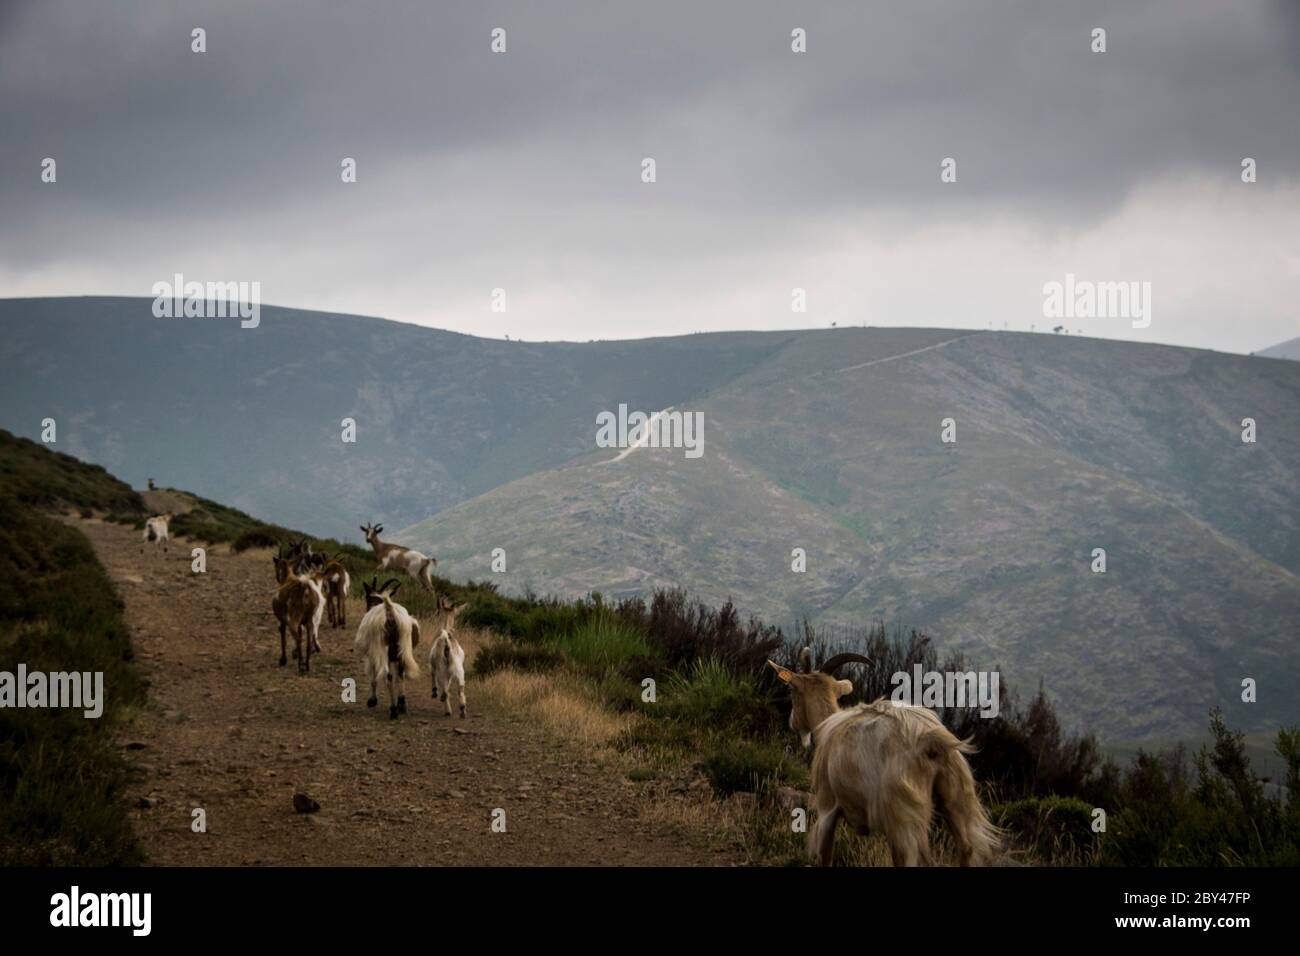 A herd of goats runs by on the trail of a mountain landscape. Cloudy and grey weather. Landscape view Stock Photo